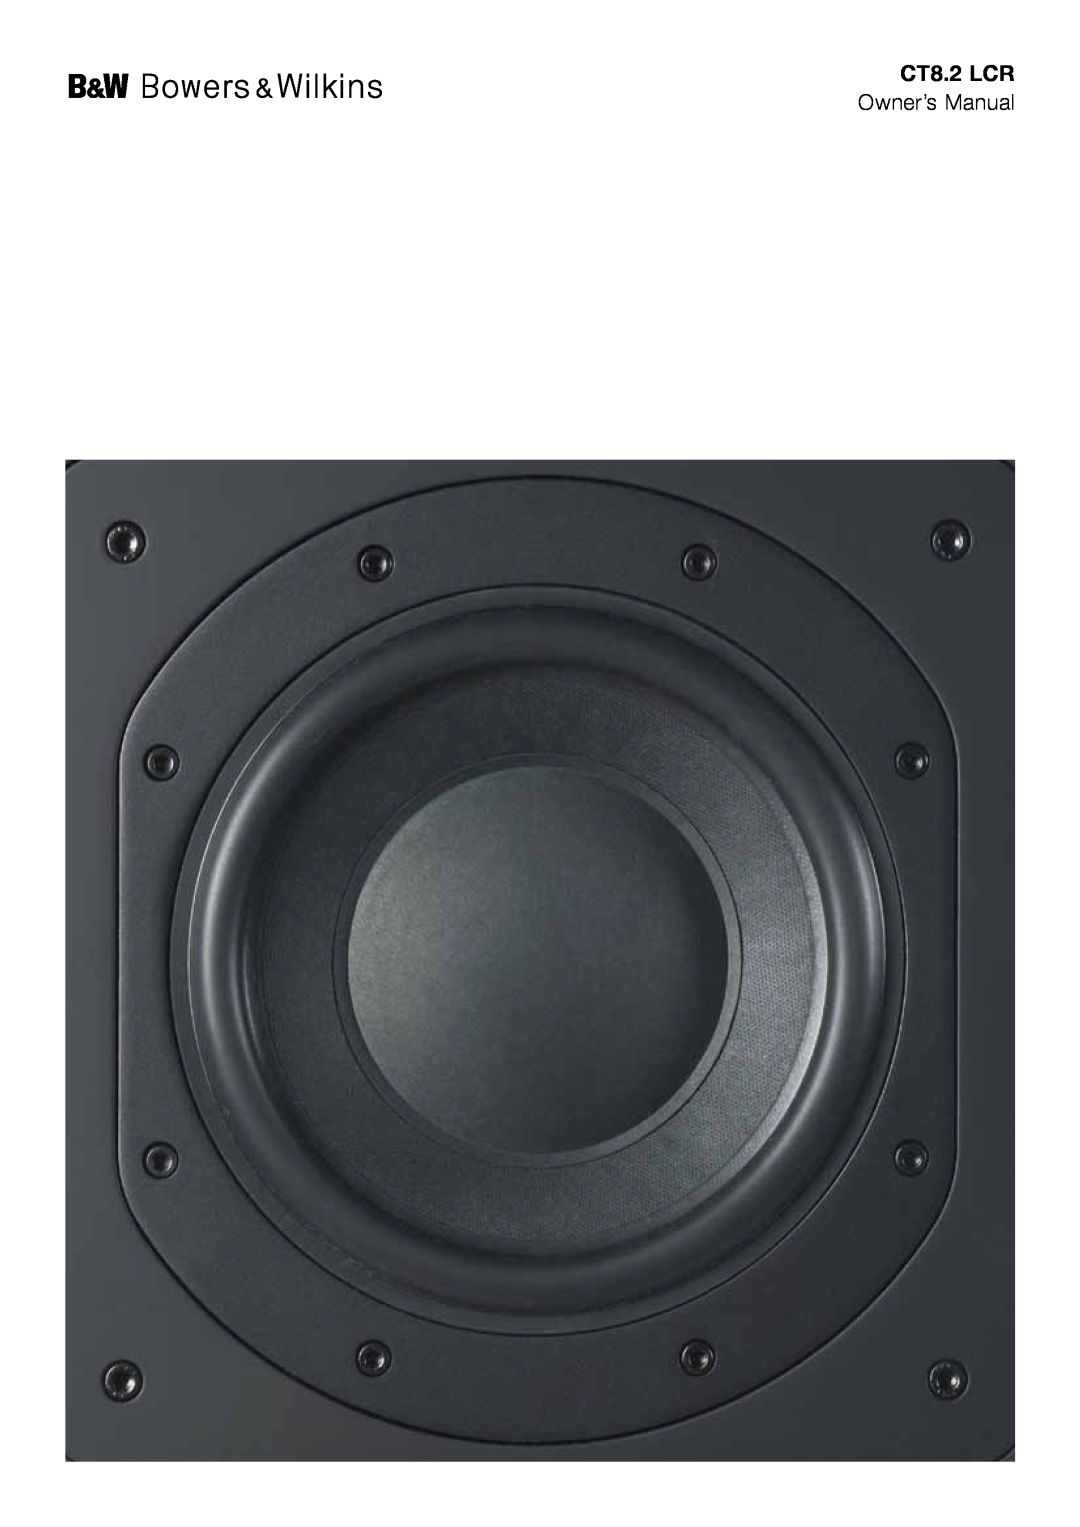 Bowers & Wilkins CT8.2 LCR owner manual 